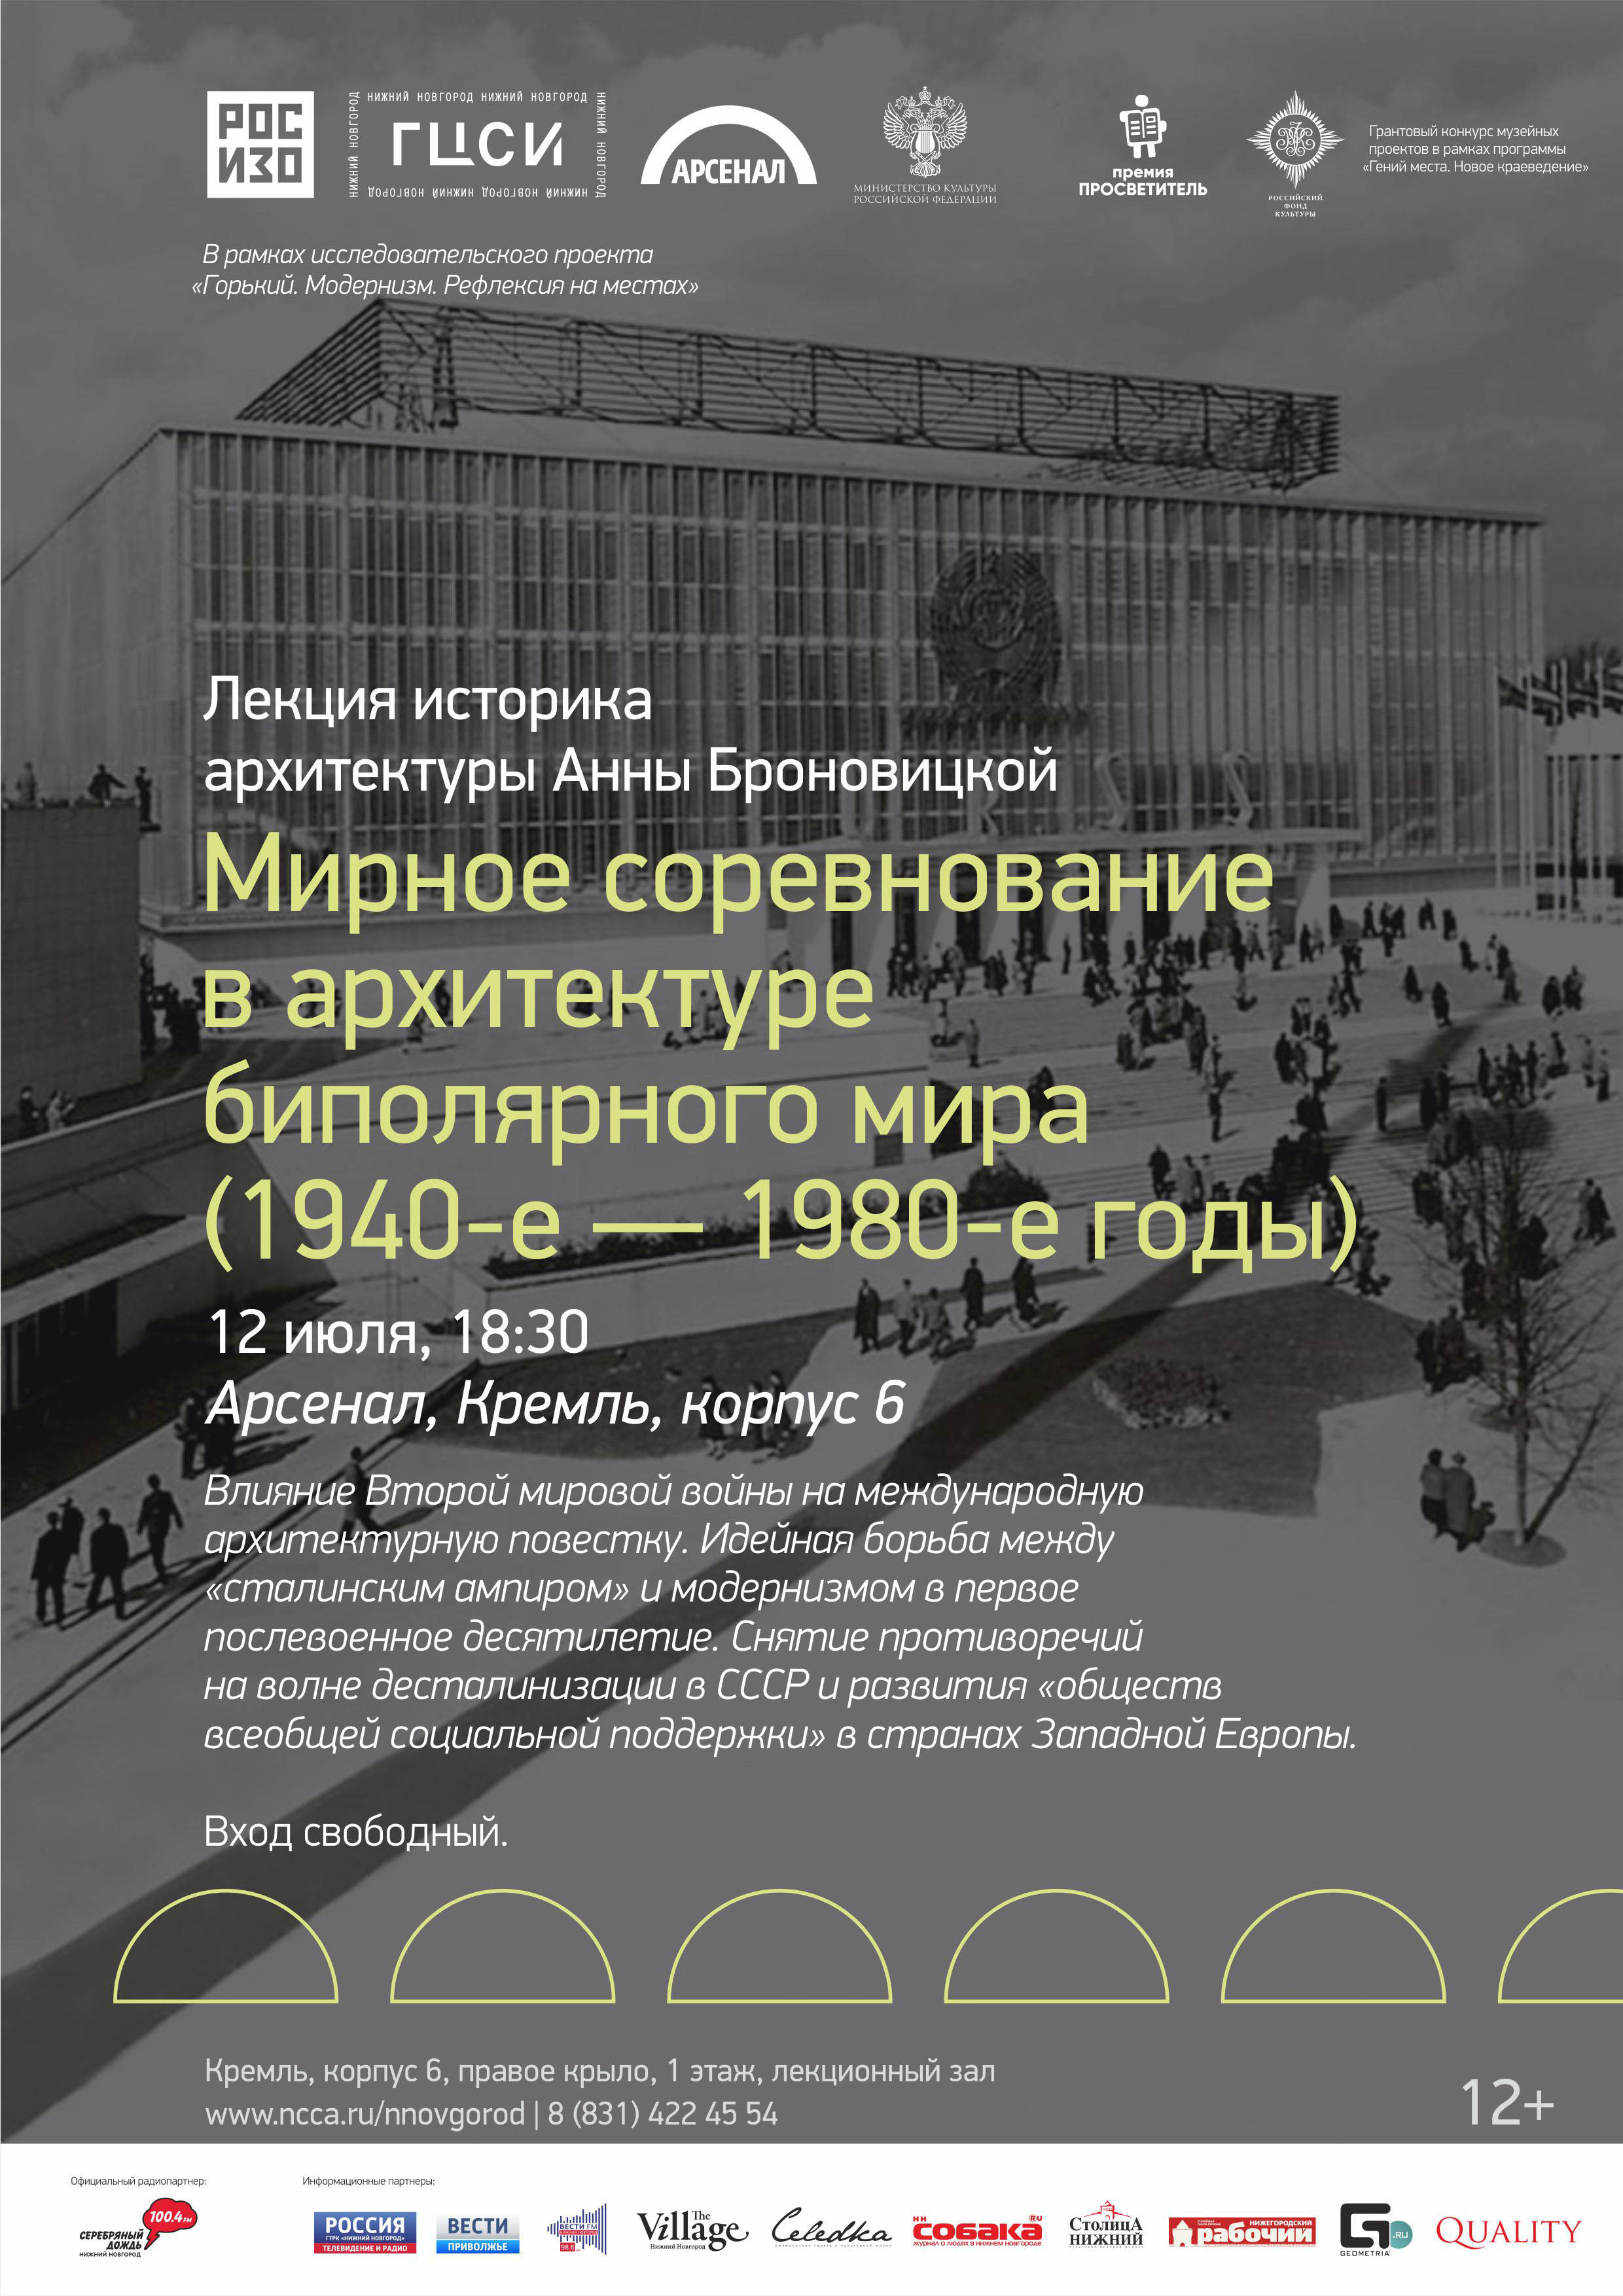 Lecture by Anna Bronovitskaya “Peaceful competition in the architecture of the bipolar world (1940s – 1980s)”